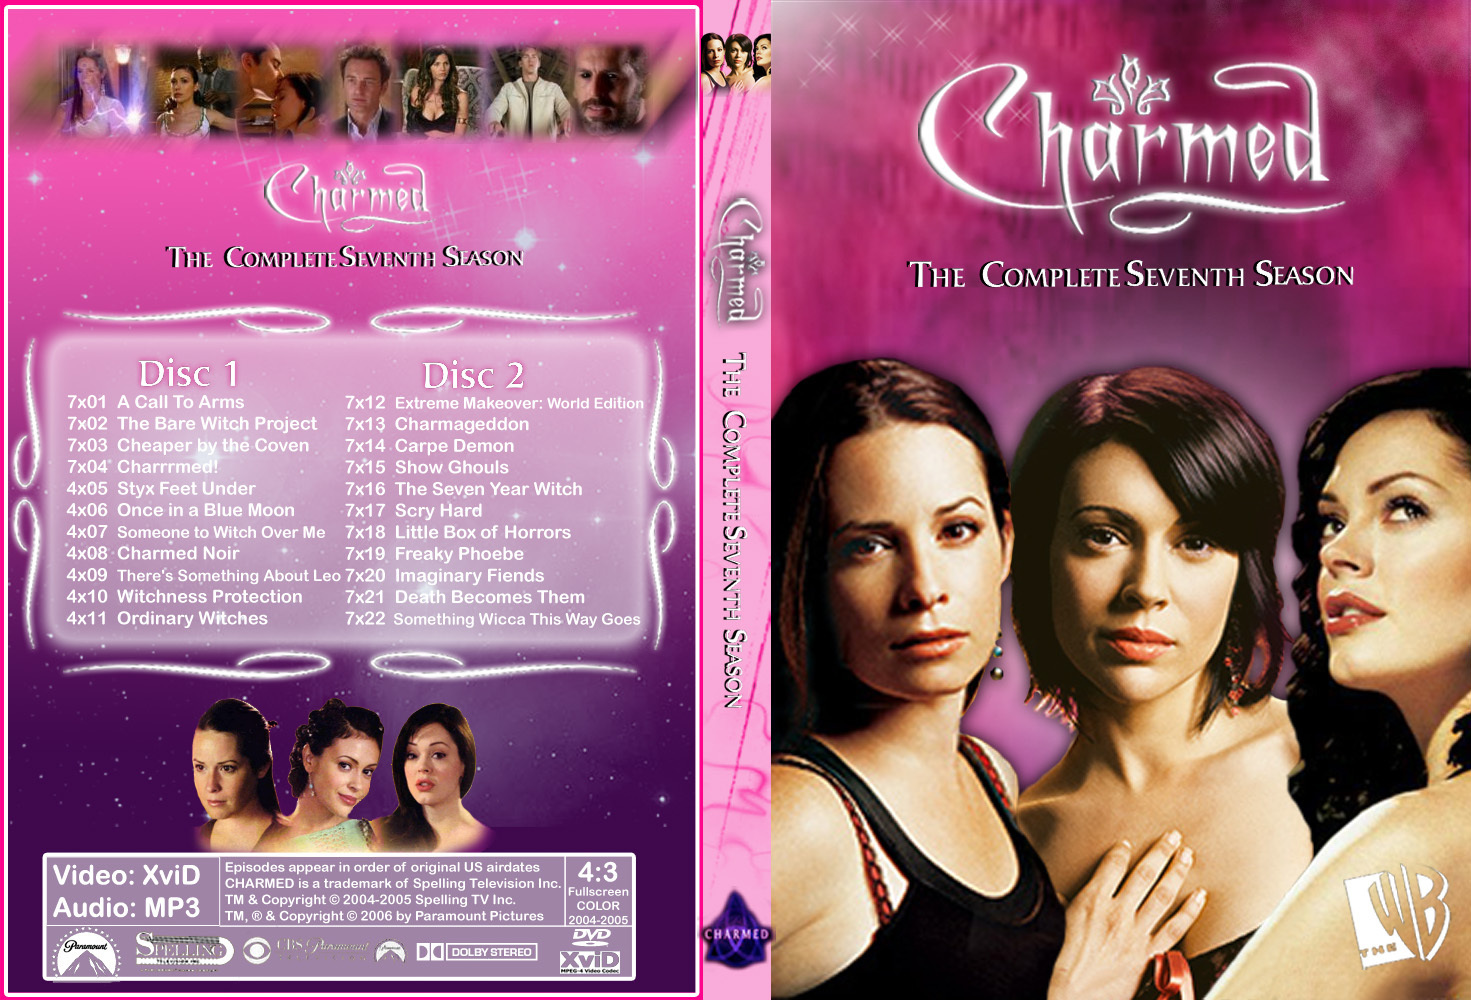 Charmed Images on Fanpop 